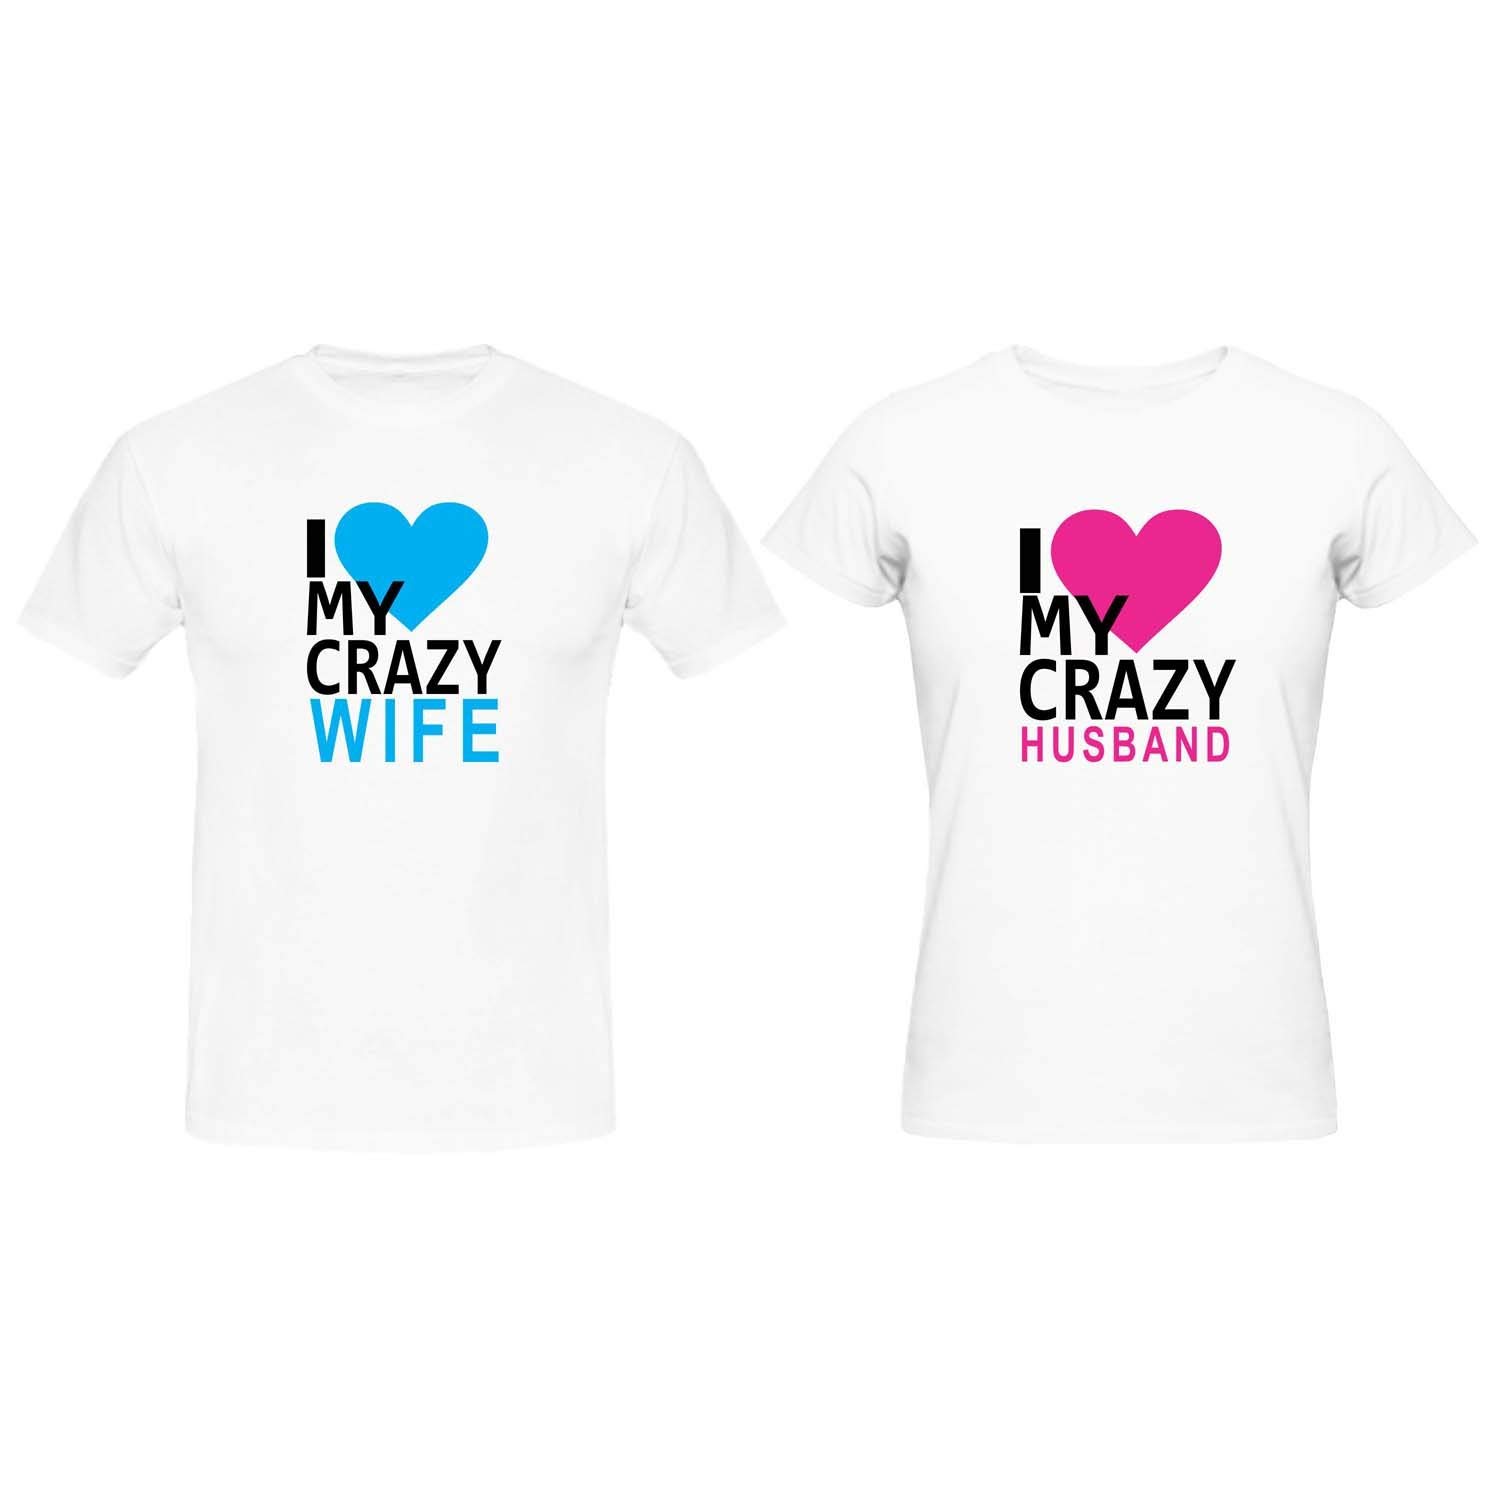 DOUBLE F WHITE COLOR I LOVE MY CRAZY WIFEY AND I LOVE MY CRAZY HUBBY PRINTED COUPLE T-SHIRTS